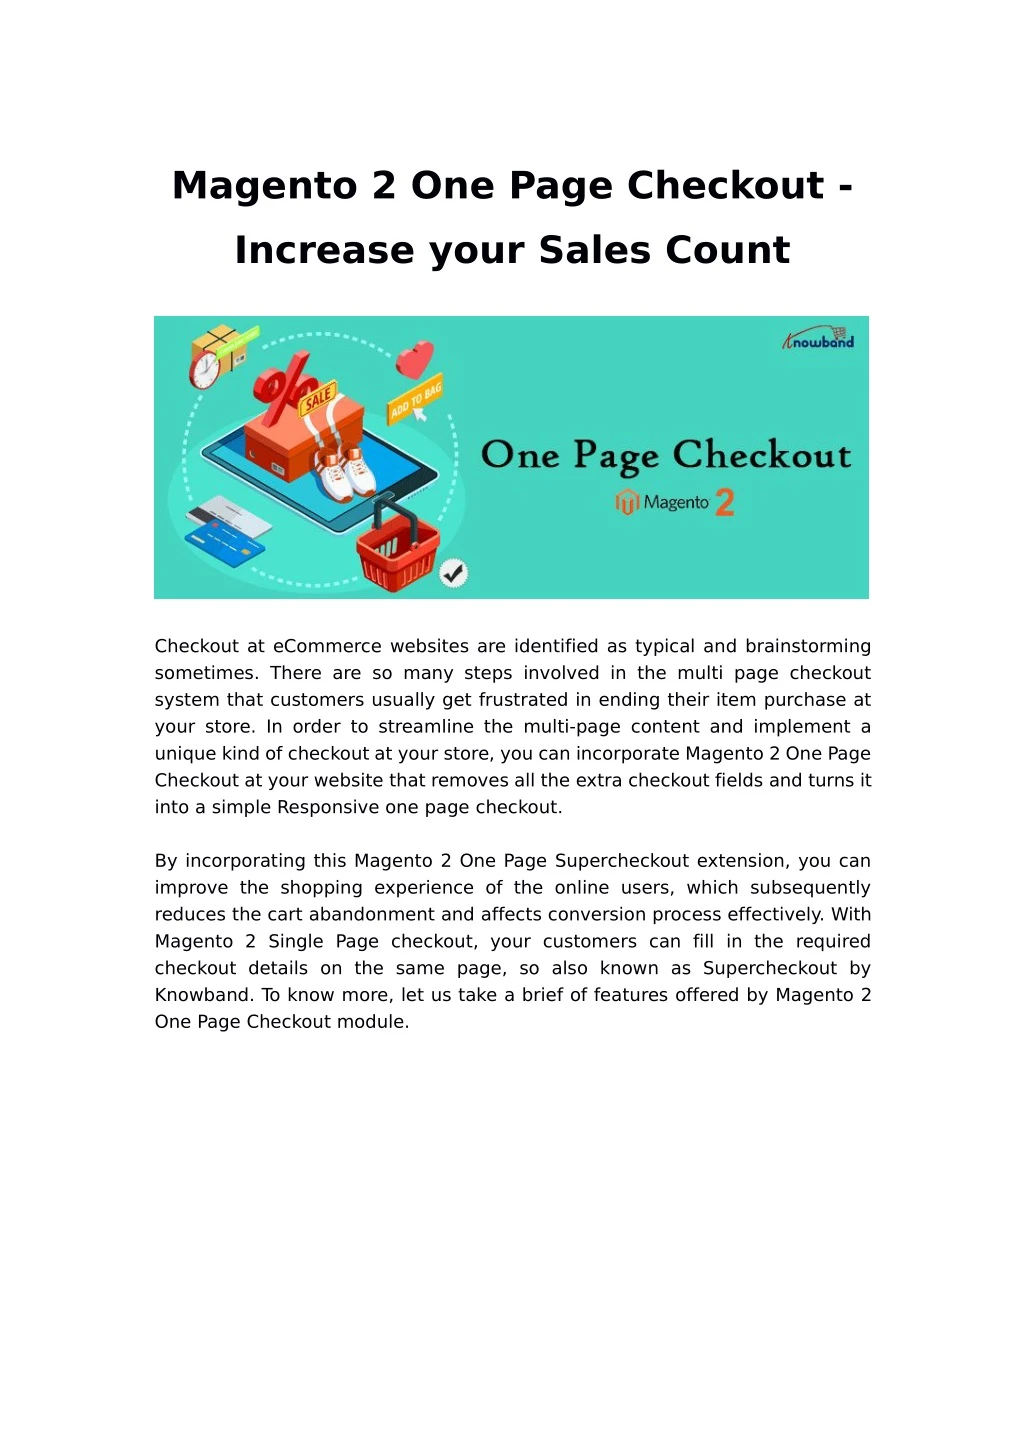 magento 2 one page checkout